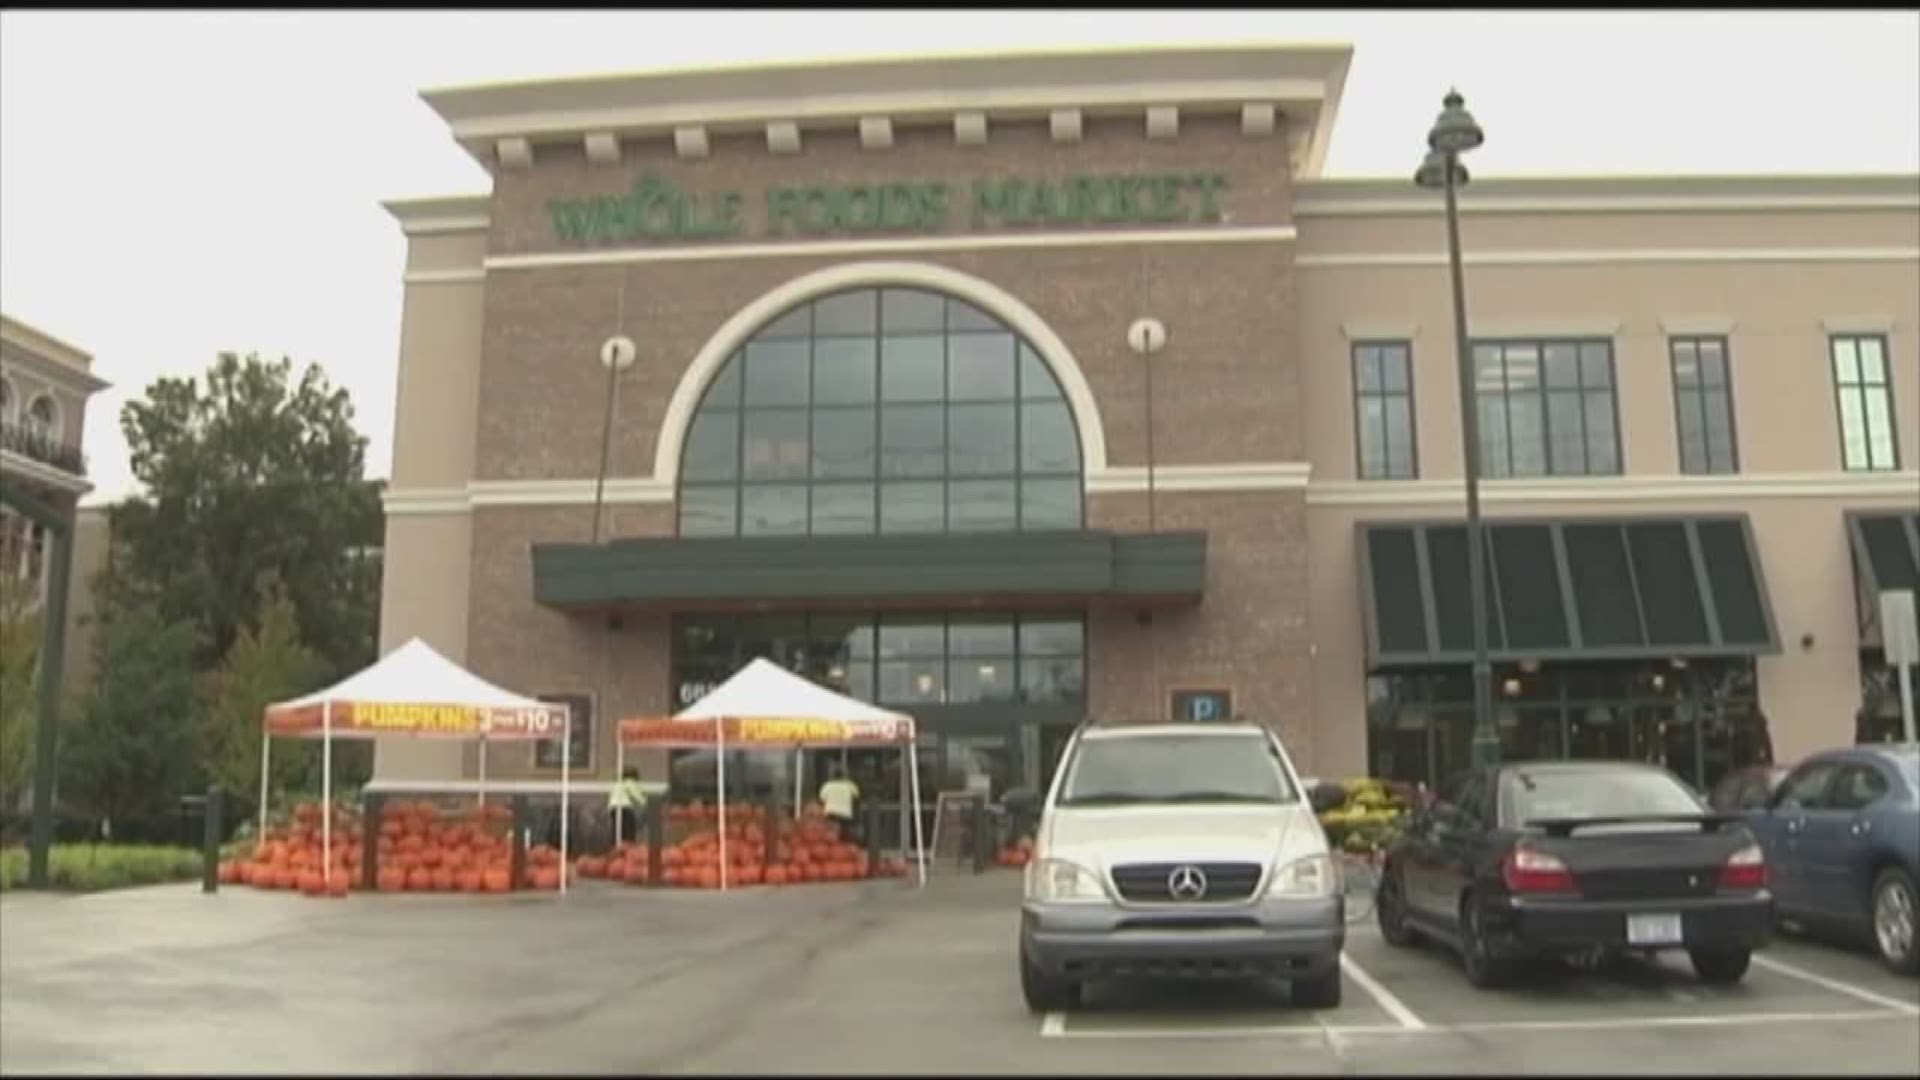 Amazon is expanding its Prime member discounts at Whole Foods Markets to Tennessee starting Wednesday. Members must sign up with their Amazon account on the Whole Foods app.